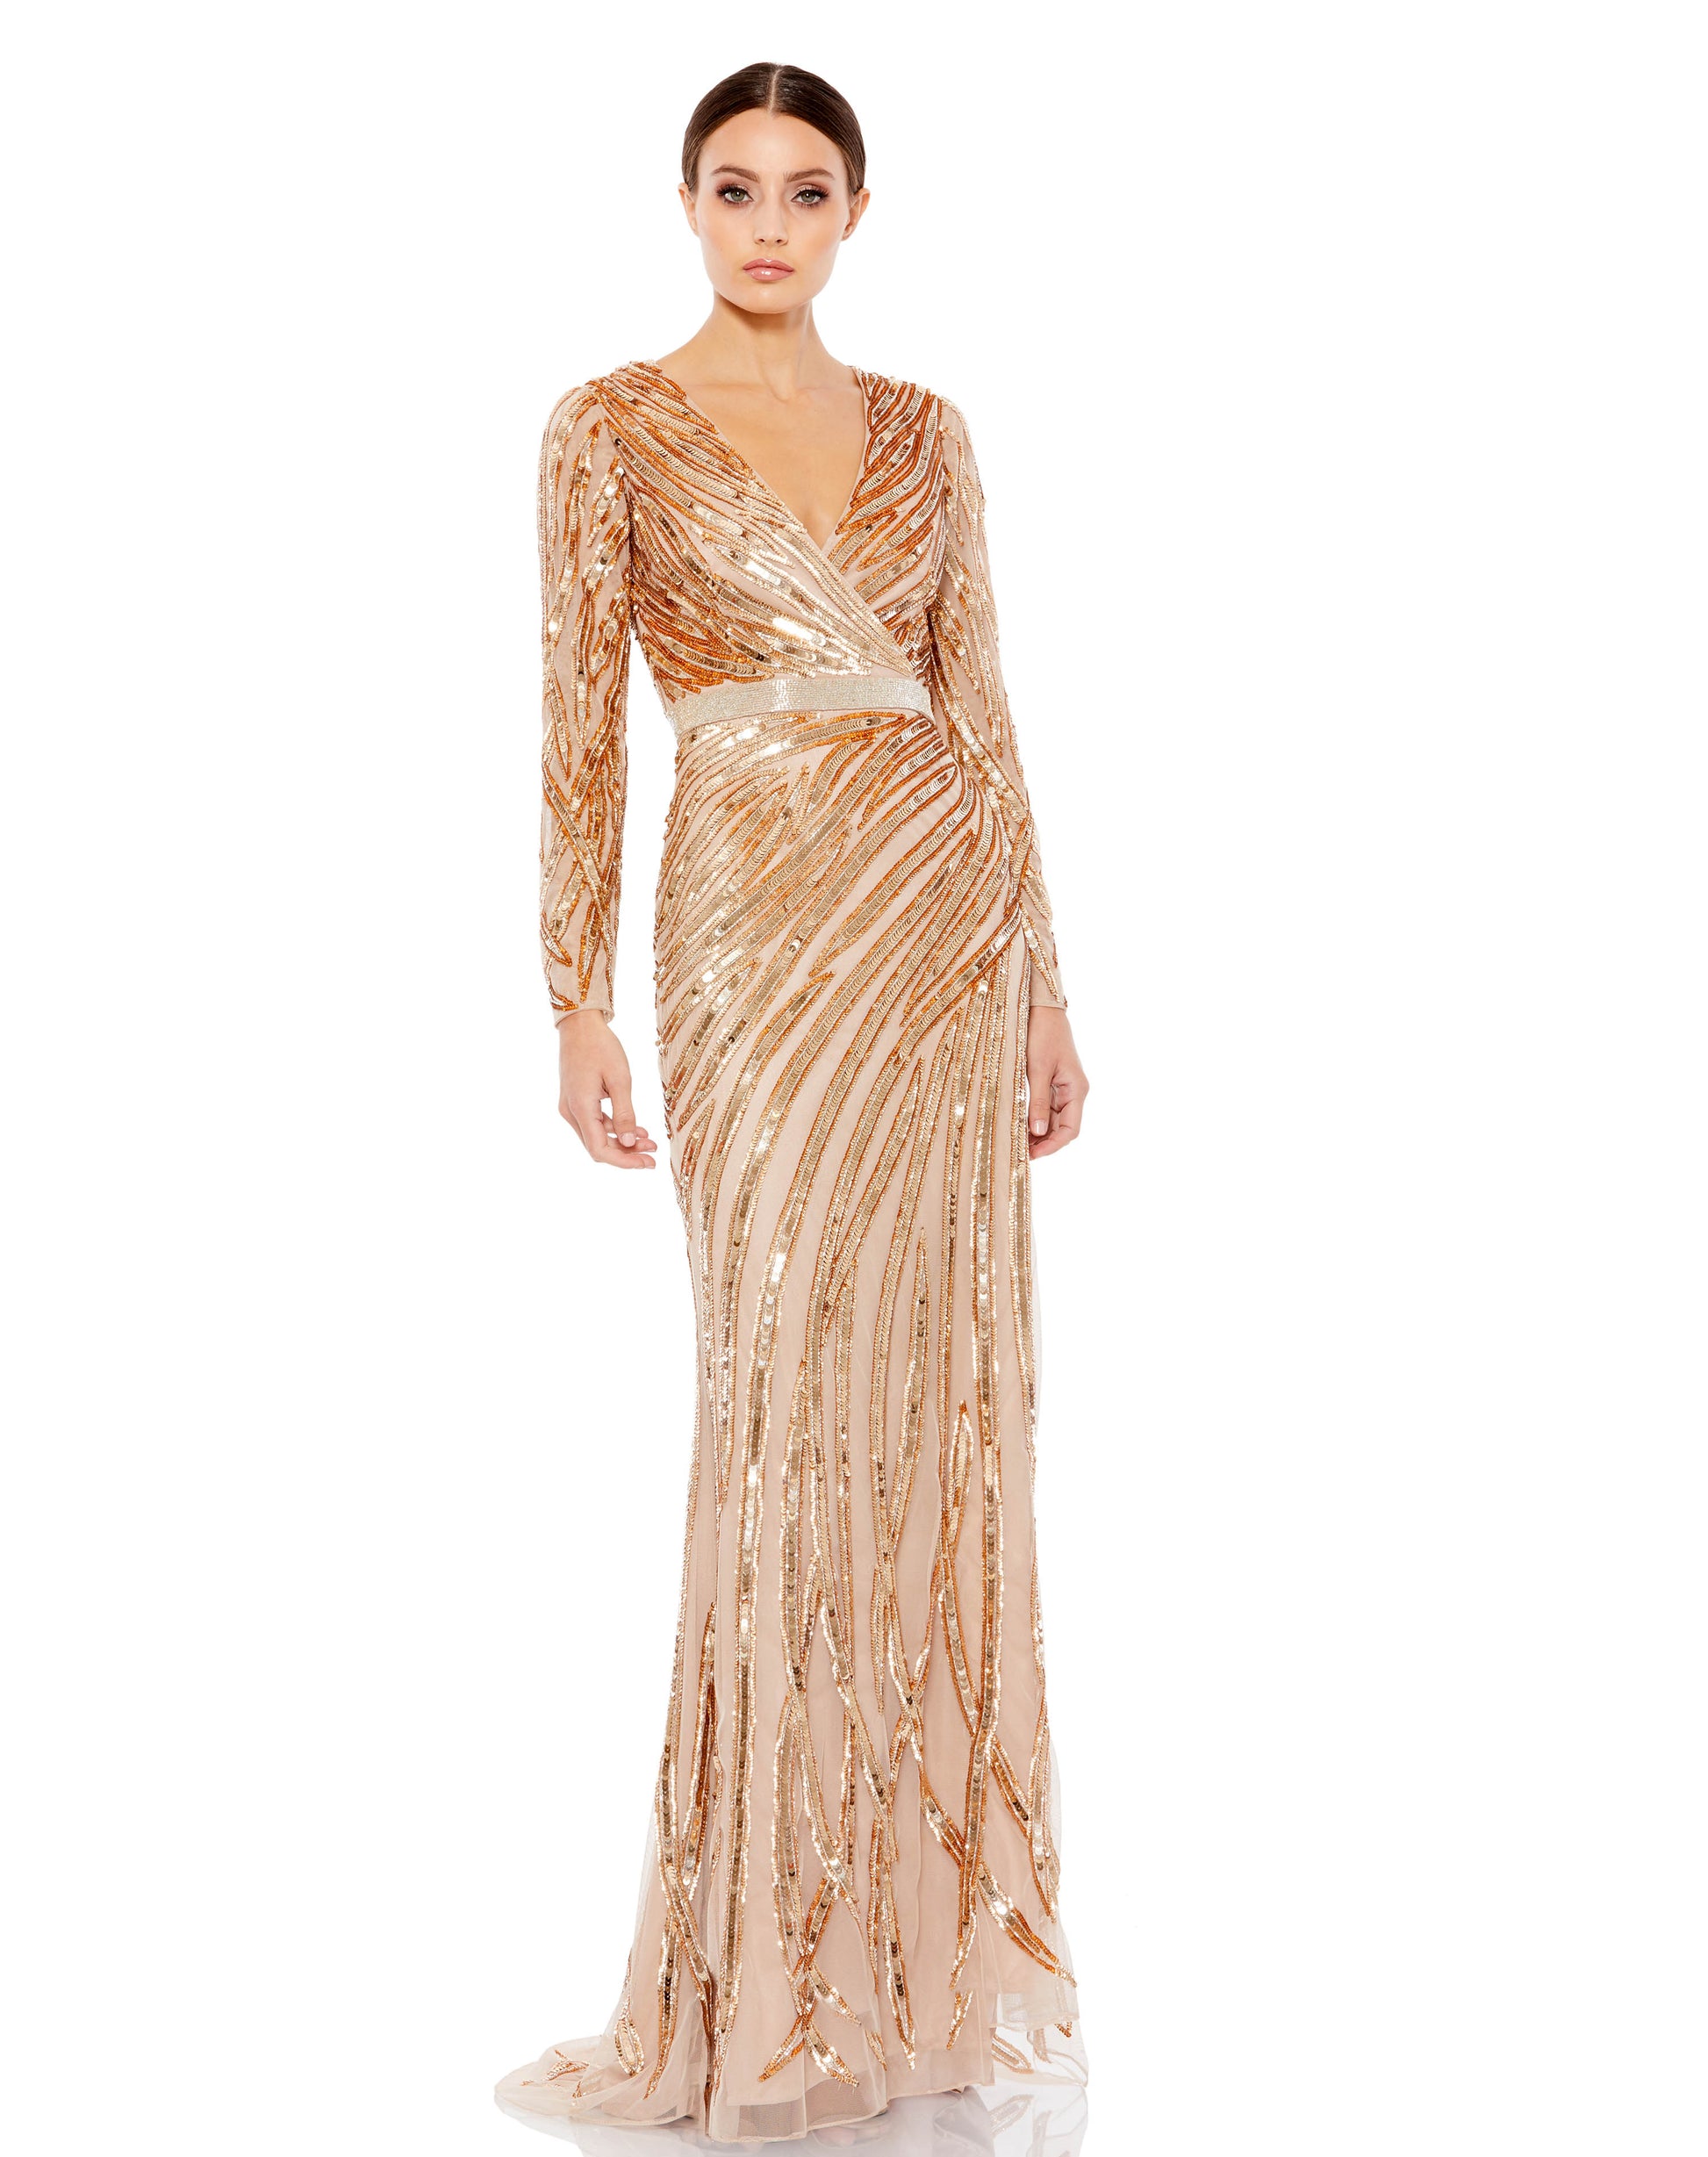 Made in an ultra-fine tulle fabric, this floor-grazing dress is embellished with flame-like rays of sequins. A sleek column shape fashioned with a surplice neckline and fitted long sleeves delivers a chic, contemporary look, while a beaded belt encircles